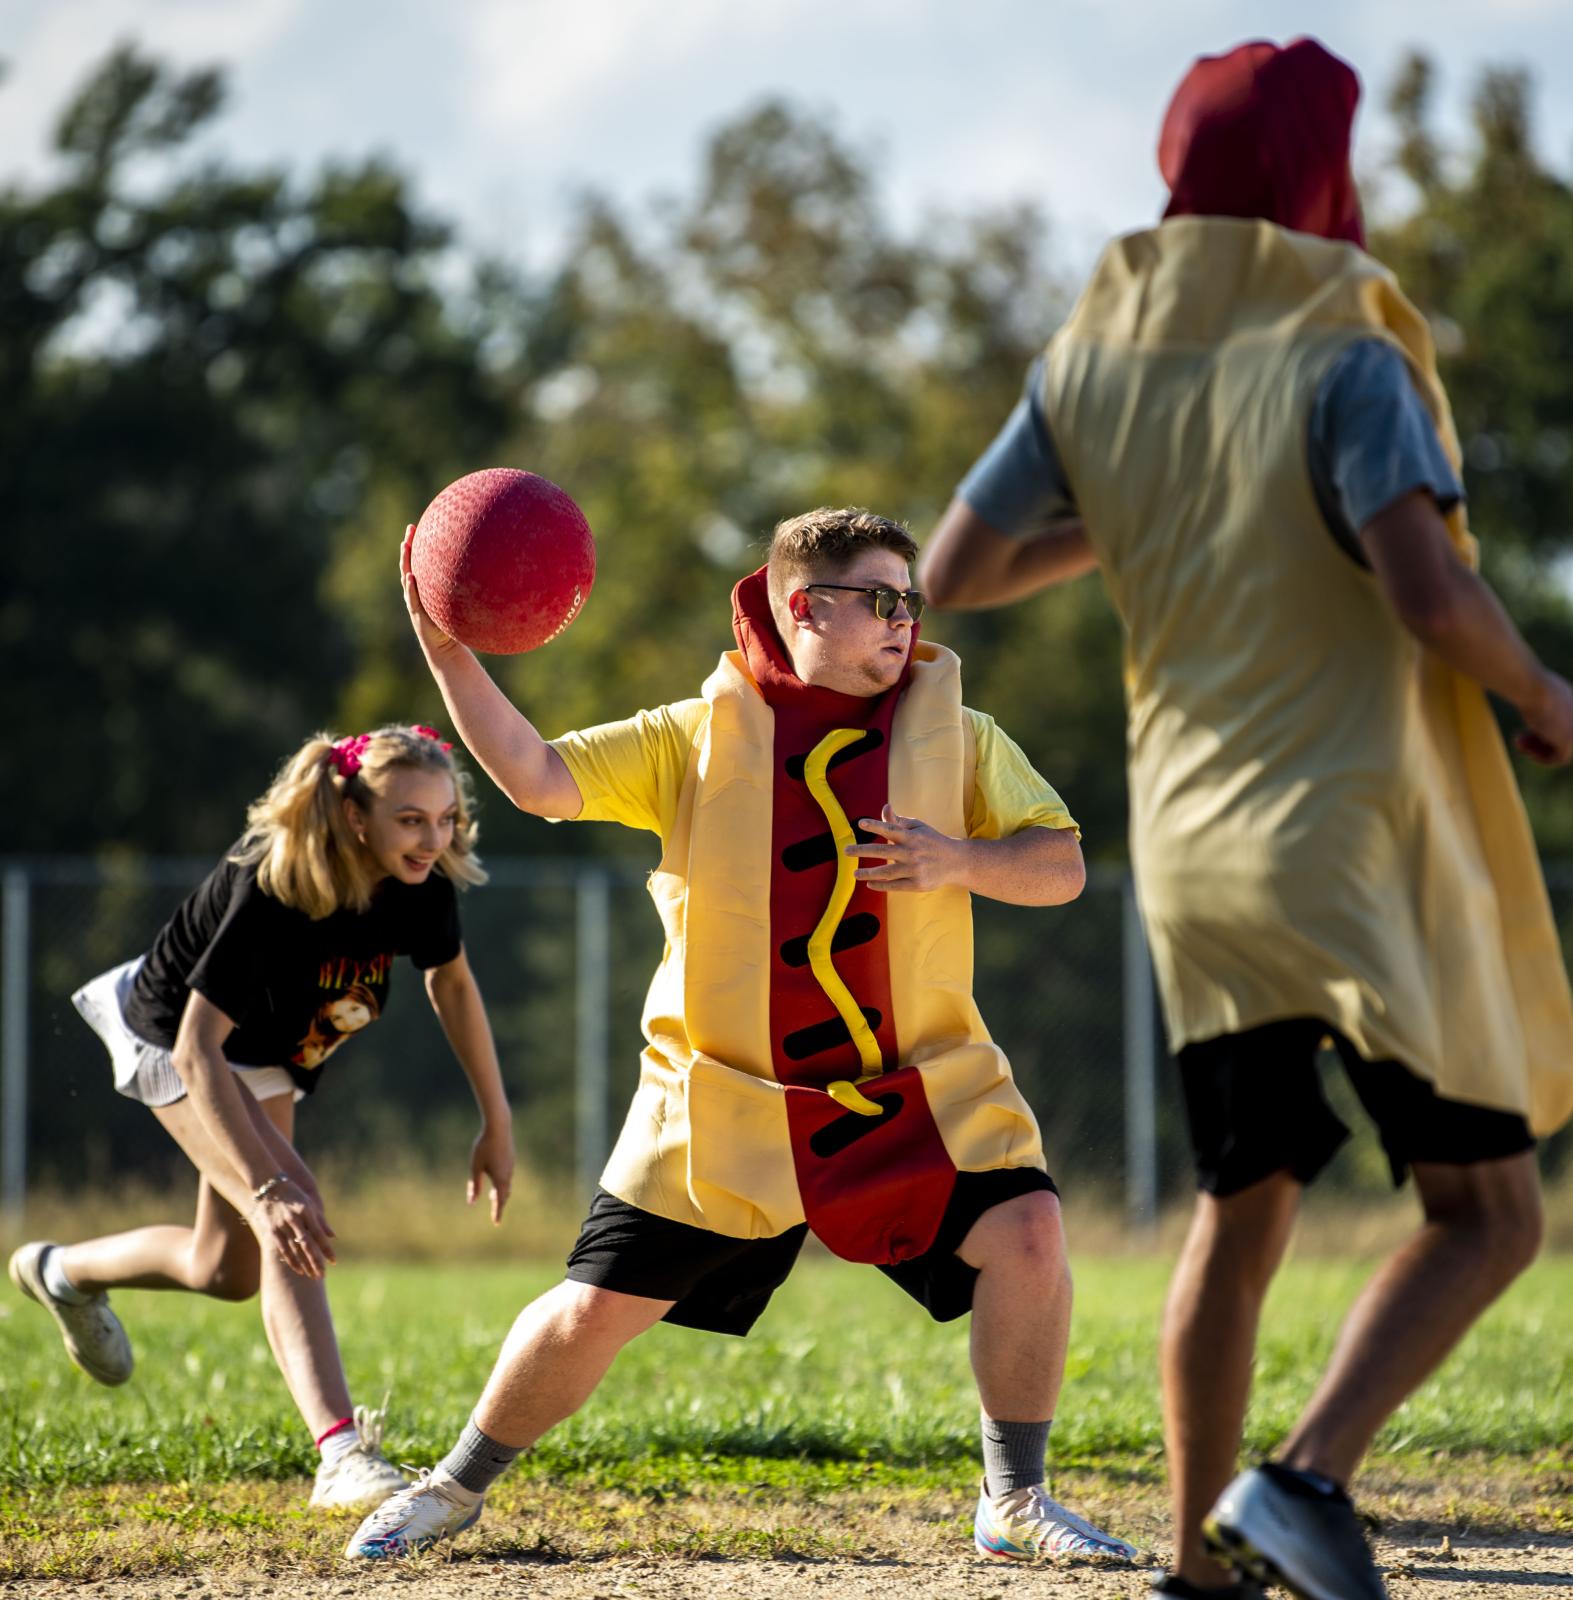 Brett Kenney throws the ball to the pitcher on Sunday, Oct. 10, 2021 at Mid-Missouri Kickball Field 2 in Columbia. Kenny and two others on the One...